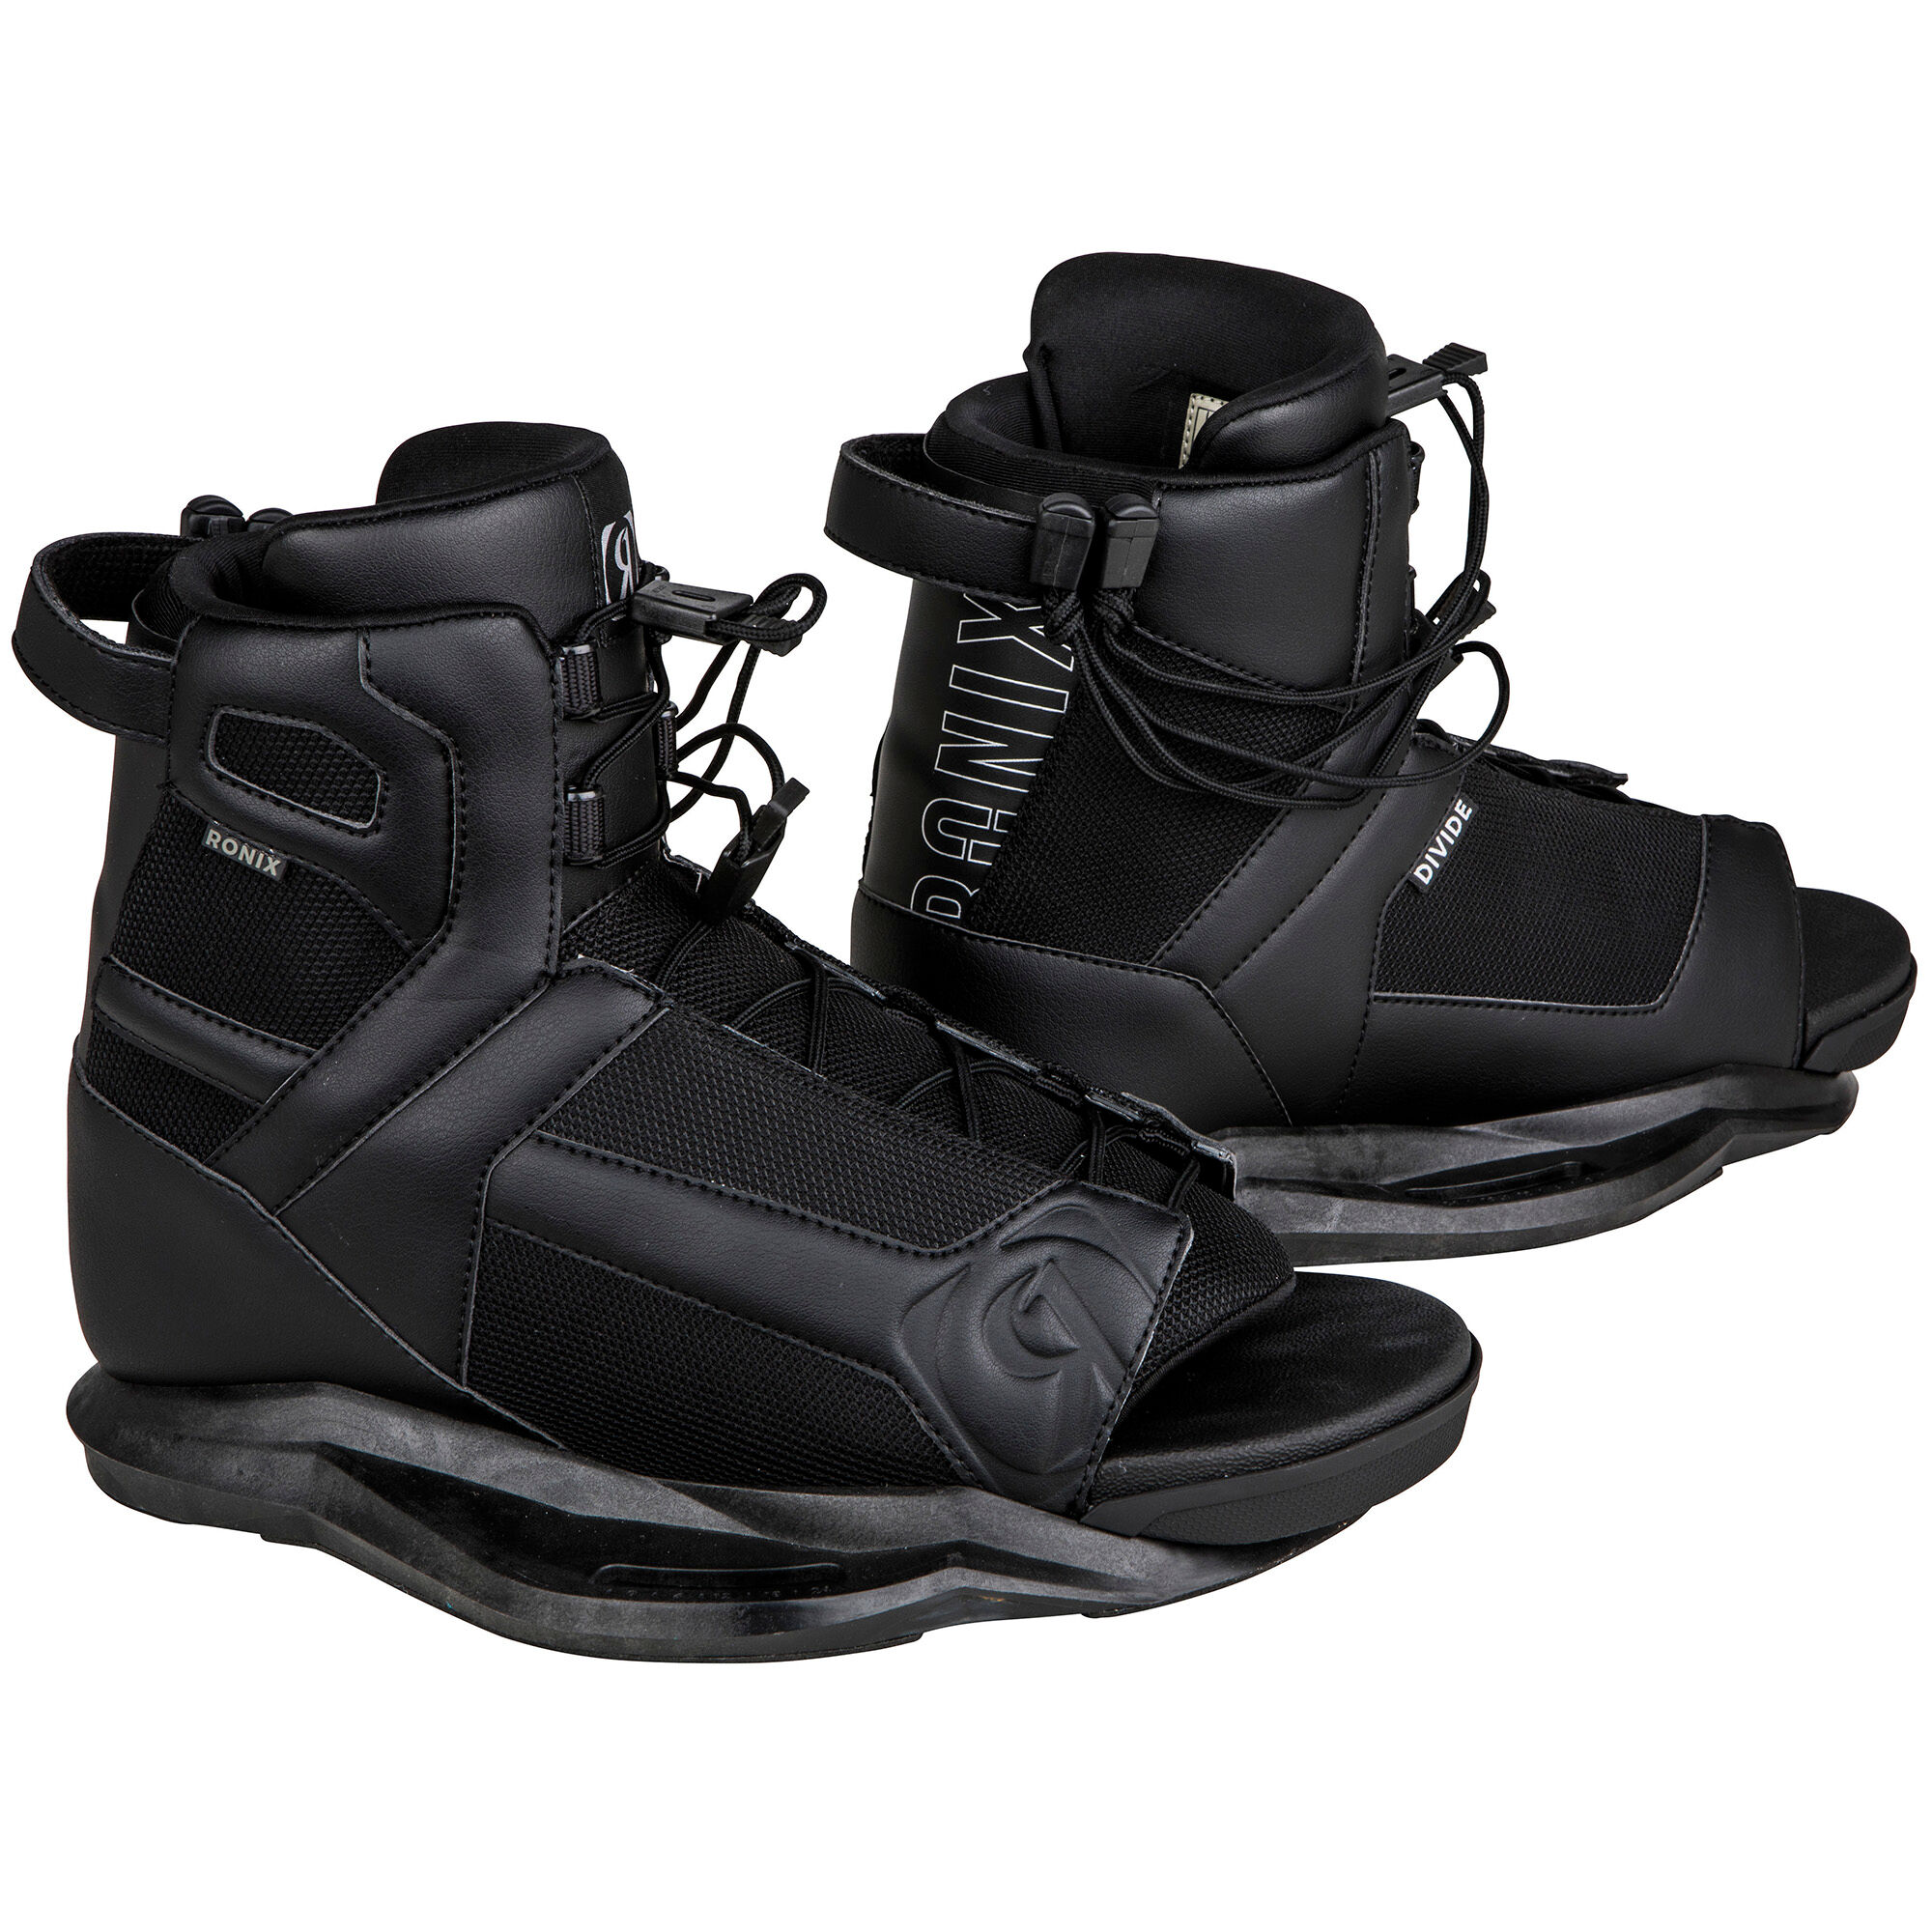 Photos - Other for Swimming Ronix Divide Wakeboard Boots 193125p 